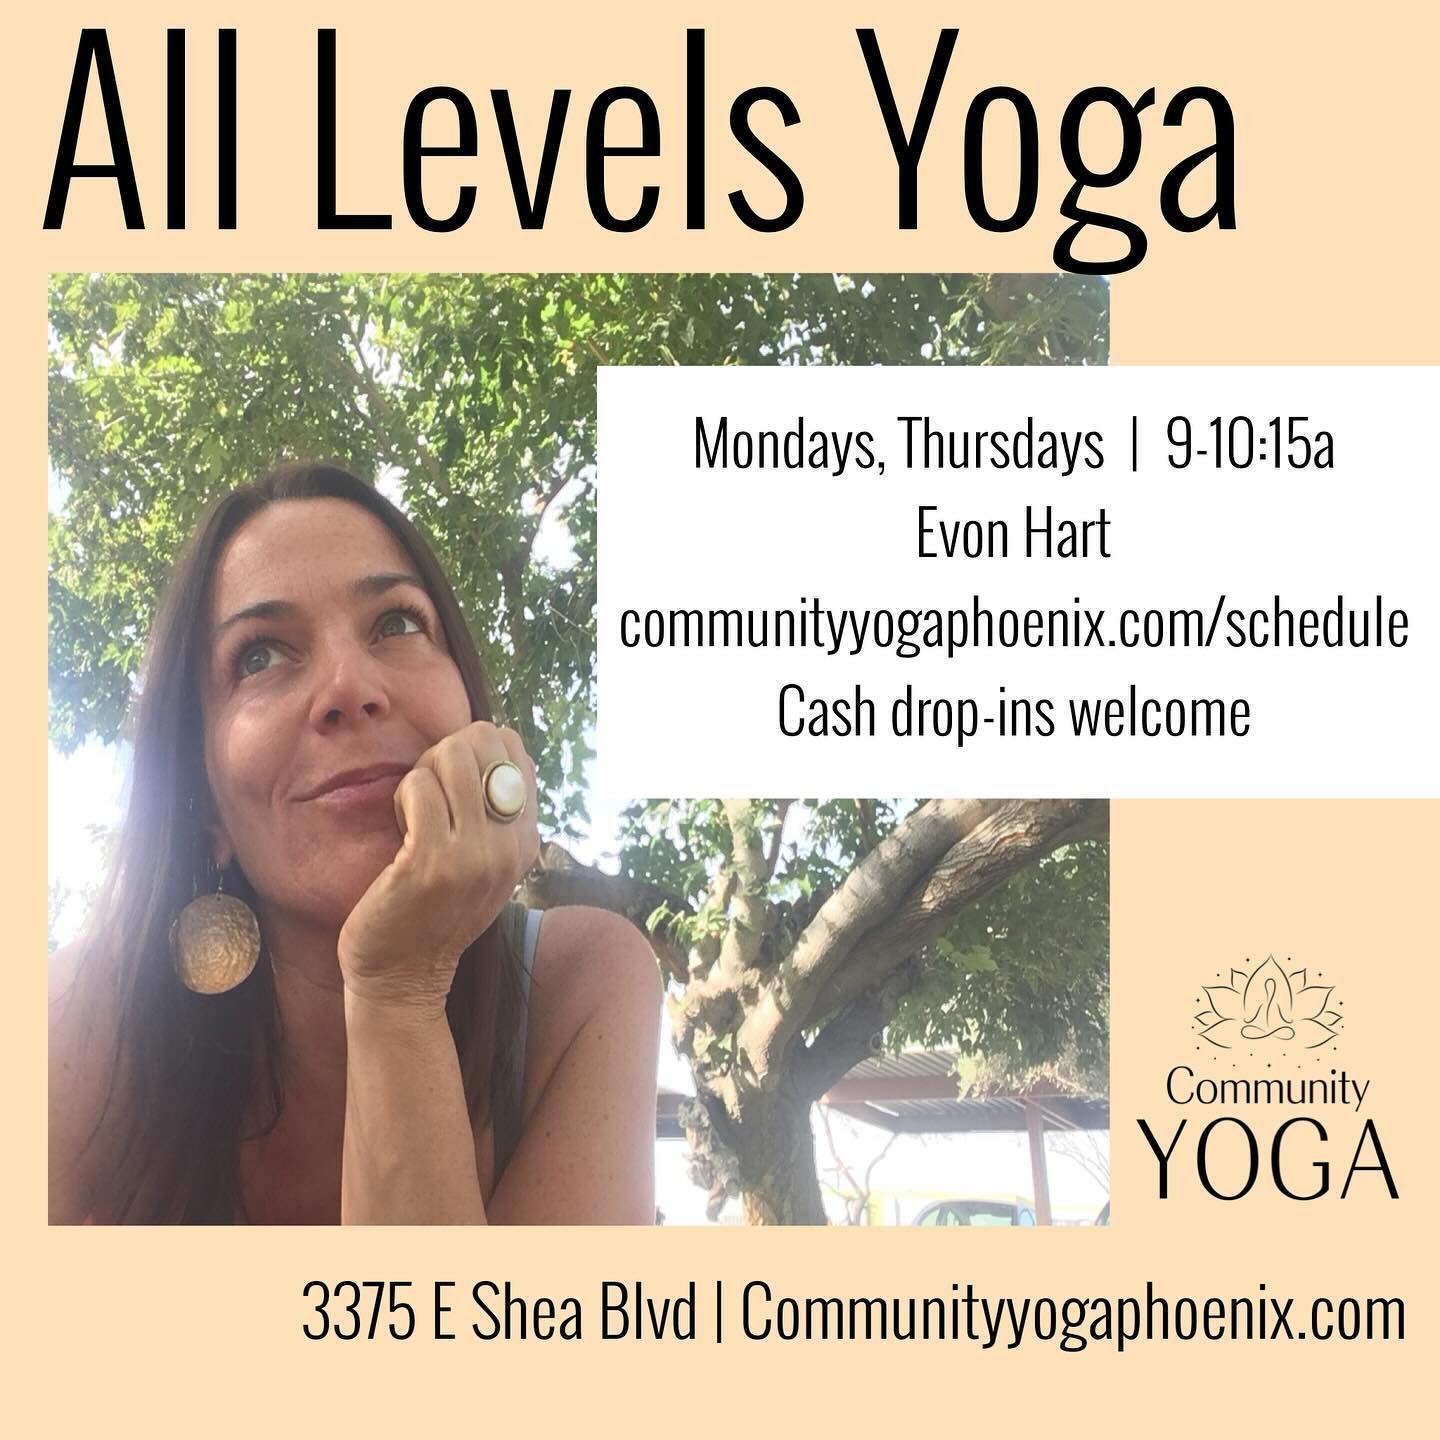 Our schedule, in slides. 
.
Community Yoga is a unique studio. There&rsquo;s no &ldquo;staff&rdquo;. Evon Hart is the founder and in addition to her classes she rents the studio to other gifted instructors. 
.
Register for Evon&rsquo;s classes throug